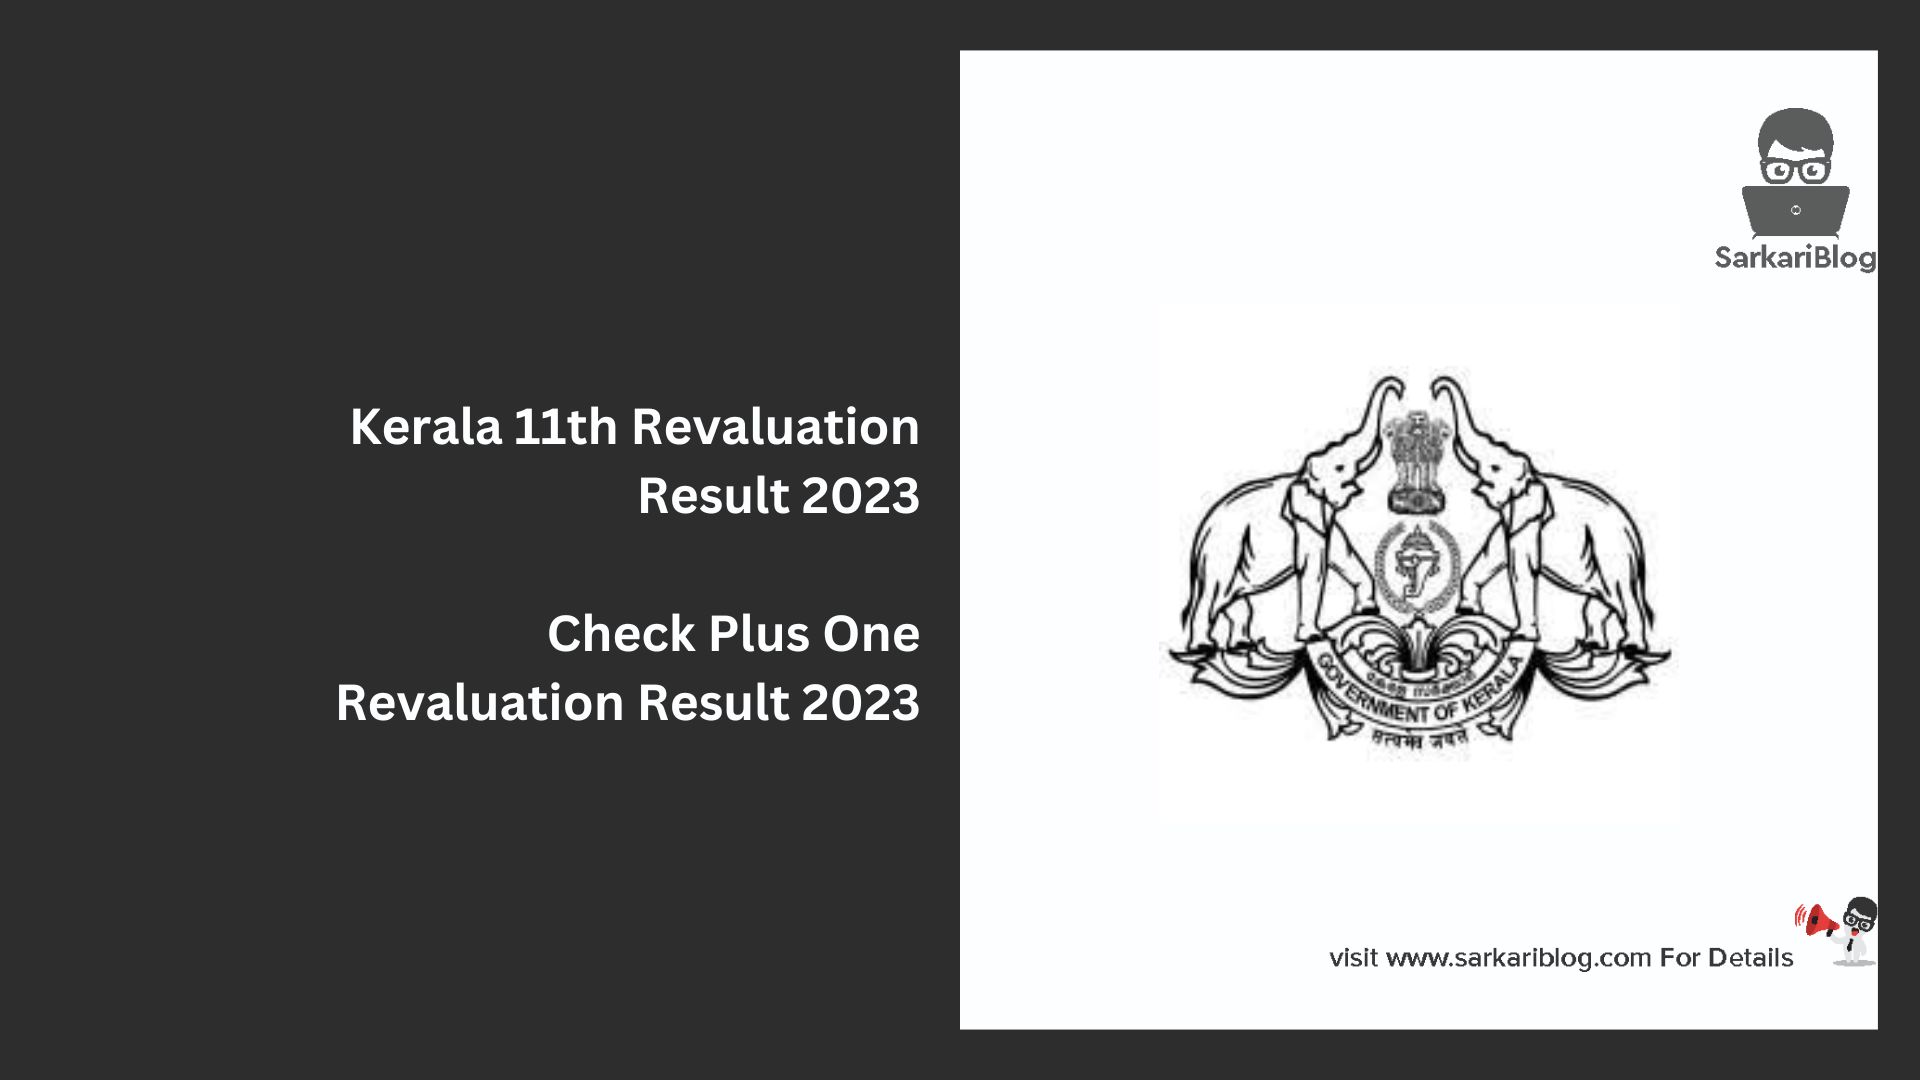 Kerala 11th Revaluation Result 2023